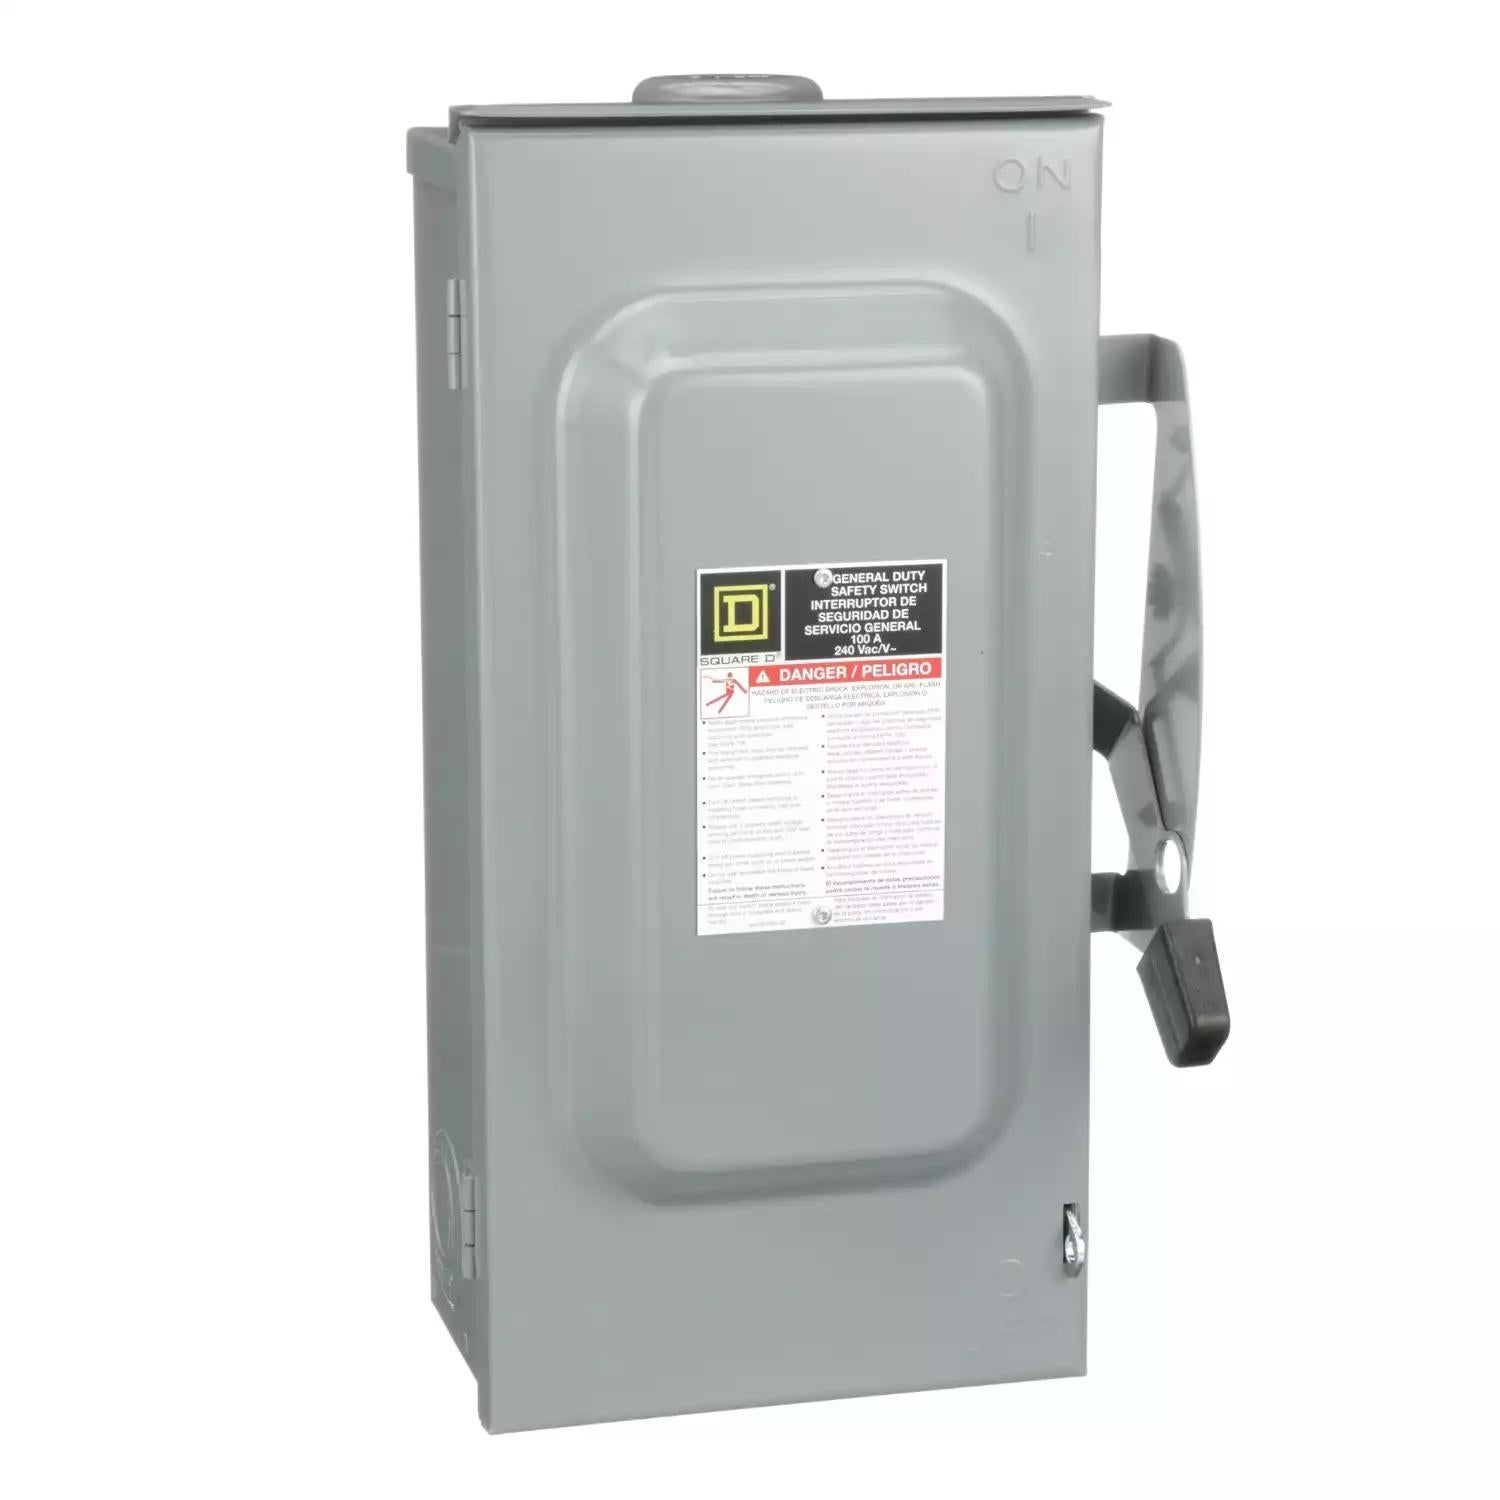 Safety switch, general duty, fusible, 100A, 3 wire, 2 poles, 1 neutral, 30hp, 240VAC, Type 3R, bolt on hub provision